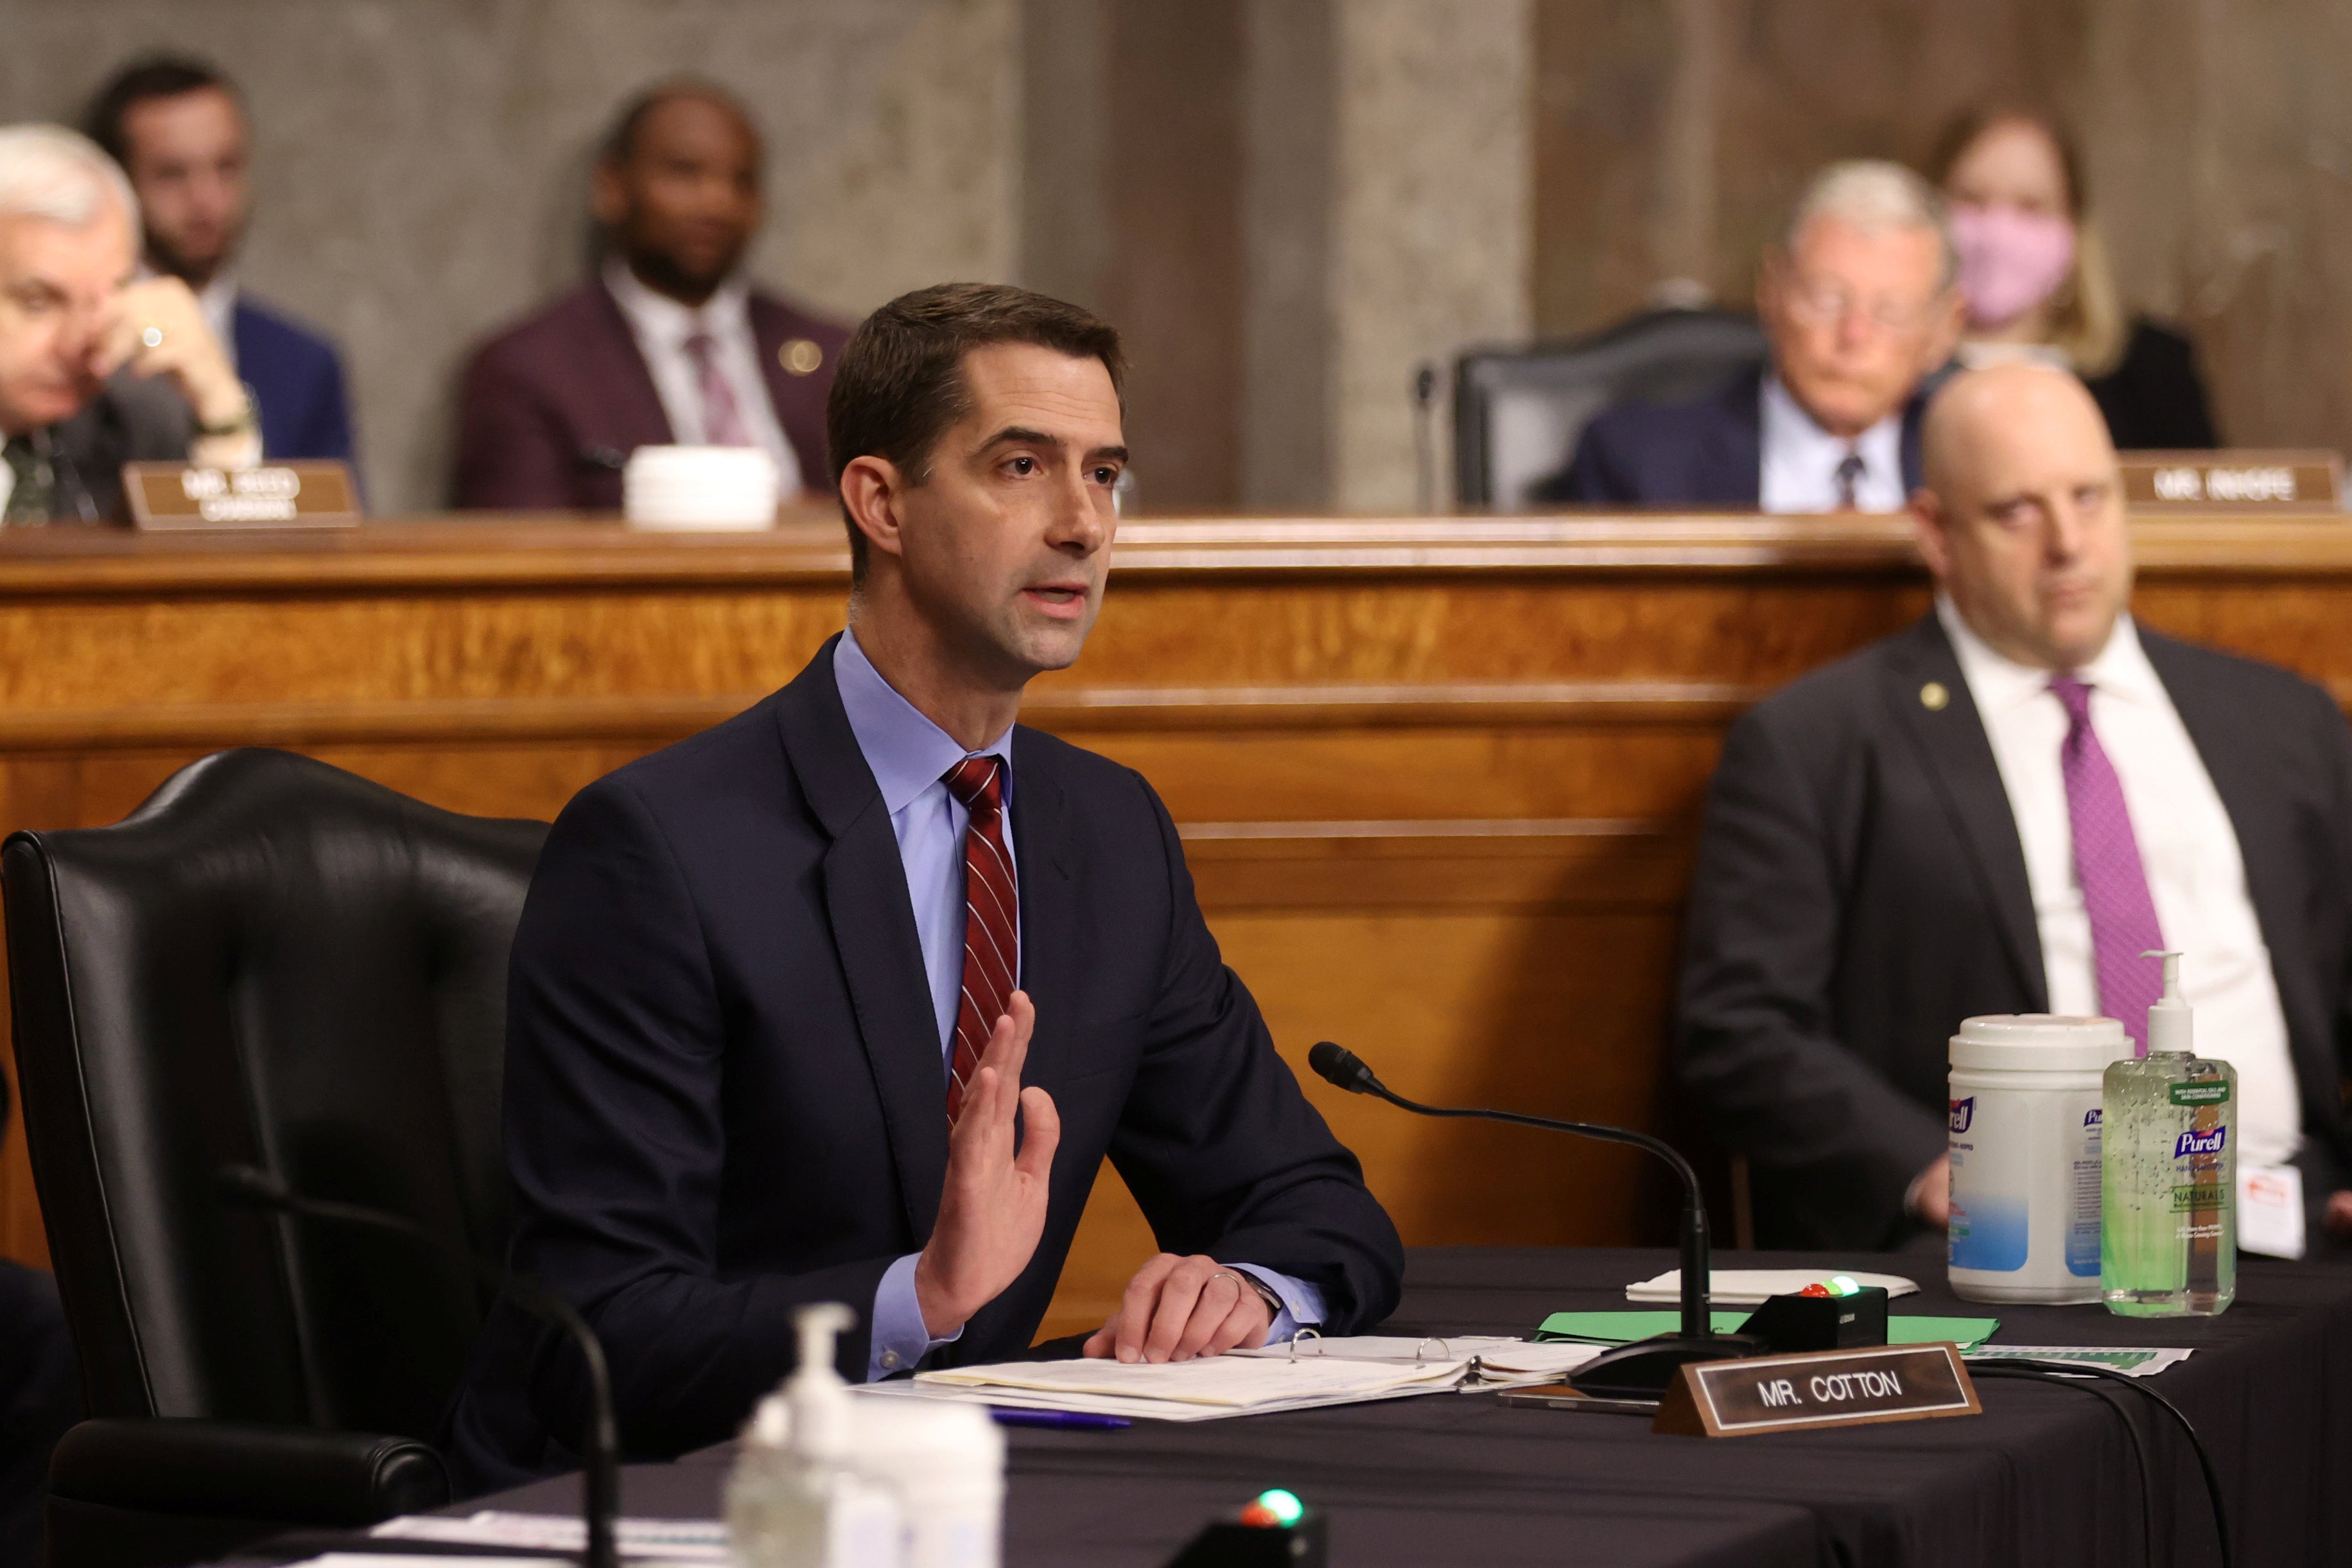 U.S. Senator Tom Cotton (R-AR) questions Secretary of Defense Lloyd Austin during a Senate Armed Services Committee hearing on the Pentagon's budget request, on Capitol Hill in Washington